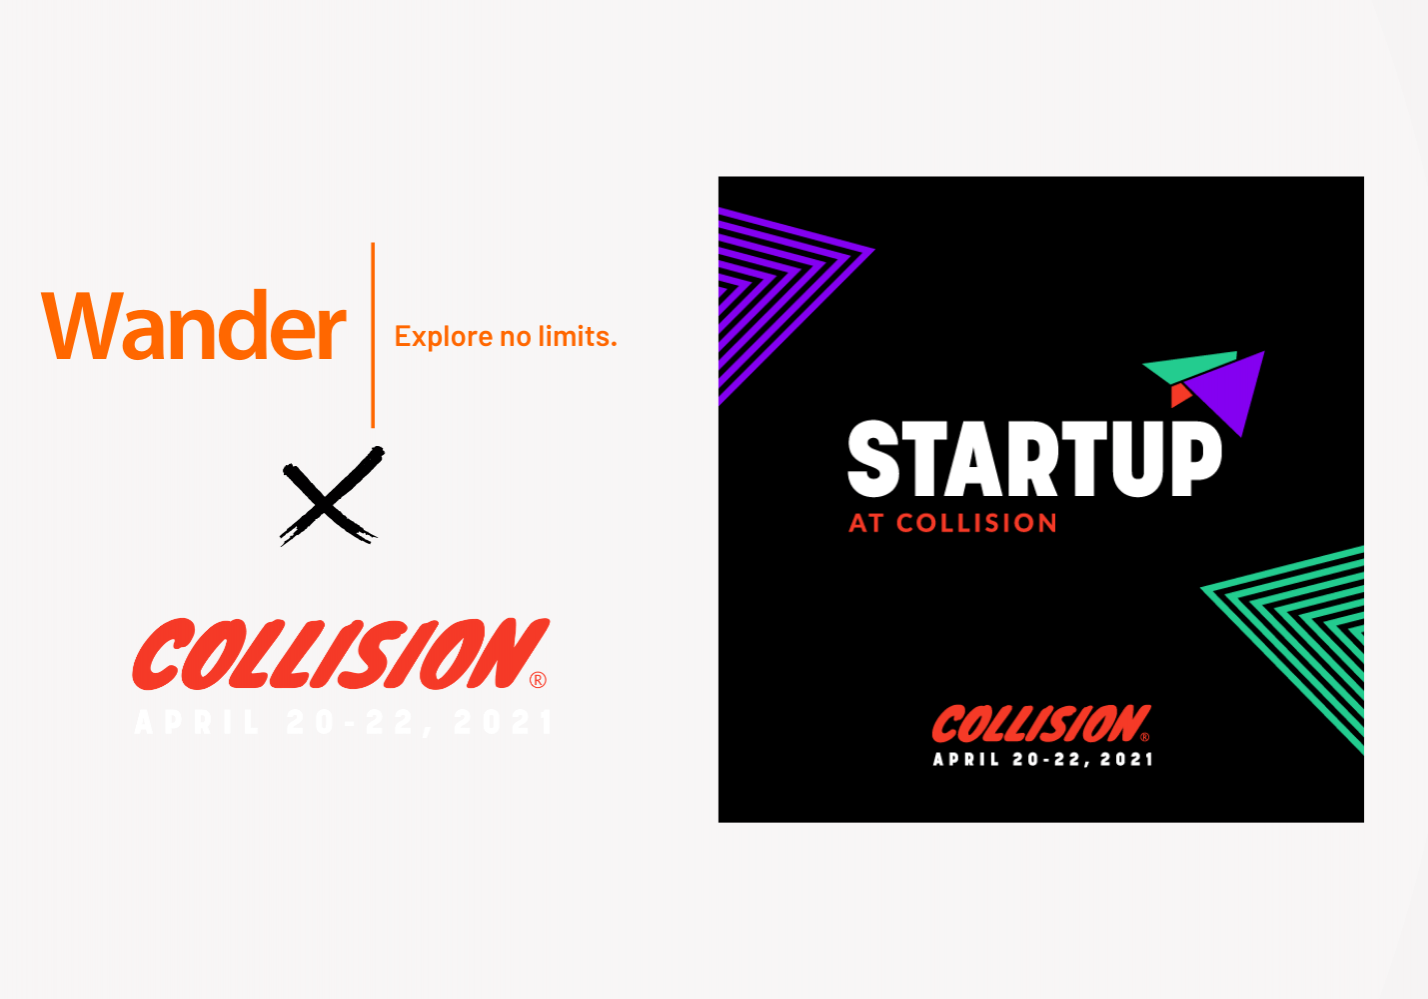 Wander Blog - Wander will take part to Collision Tech Conference 2021